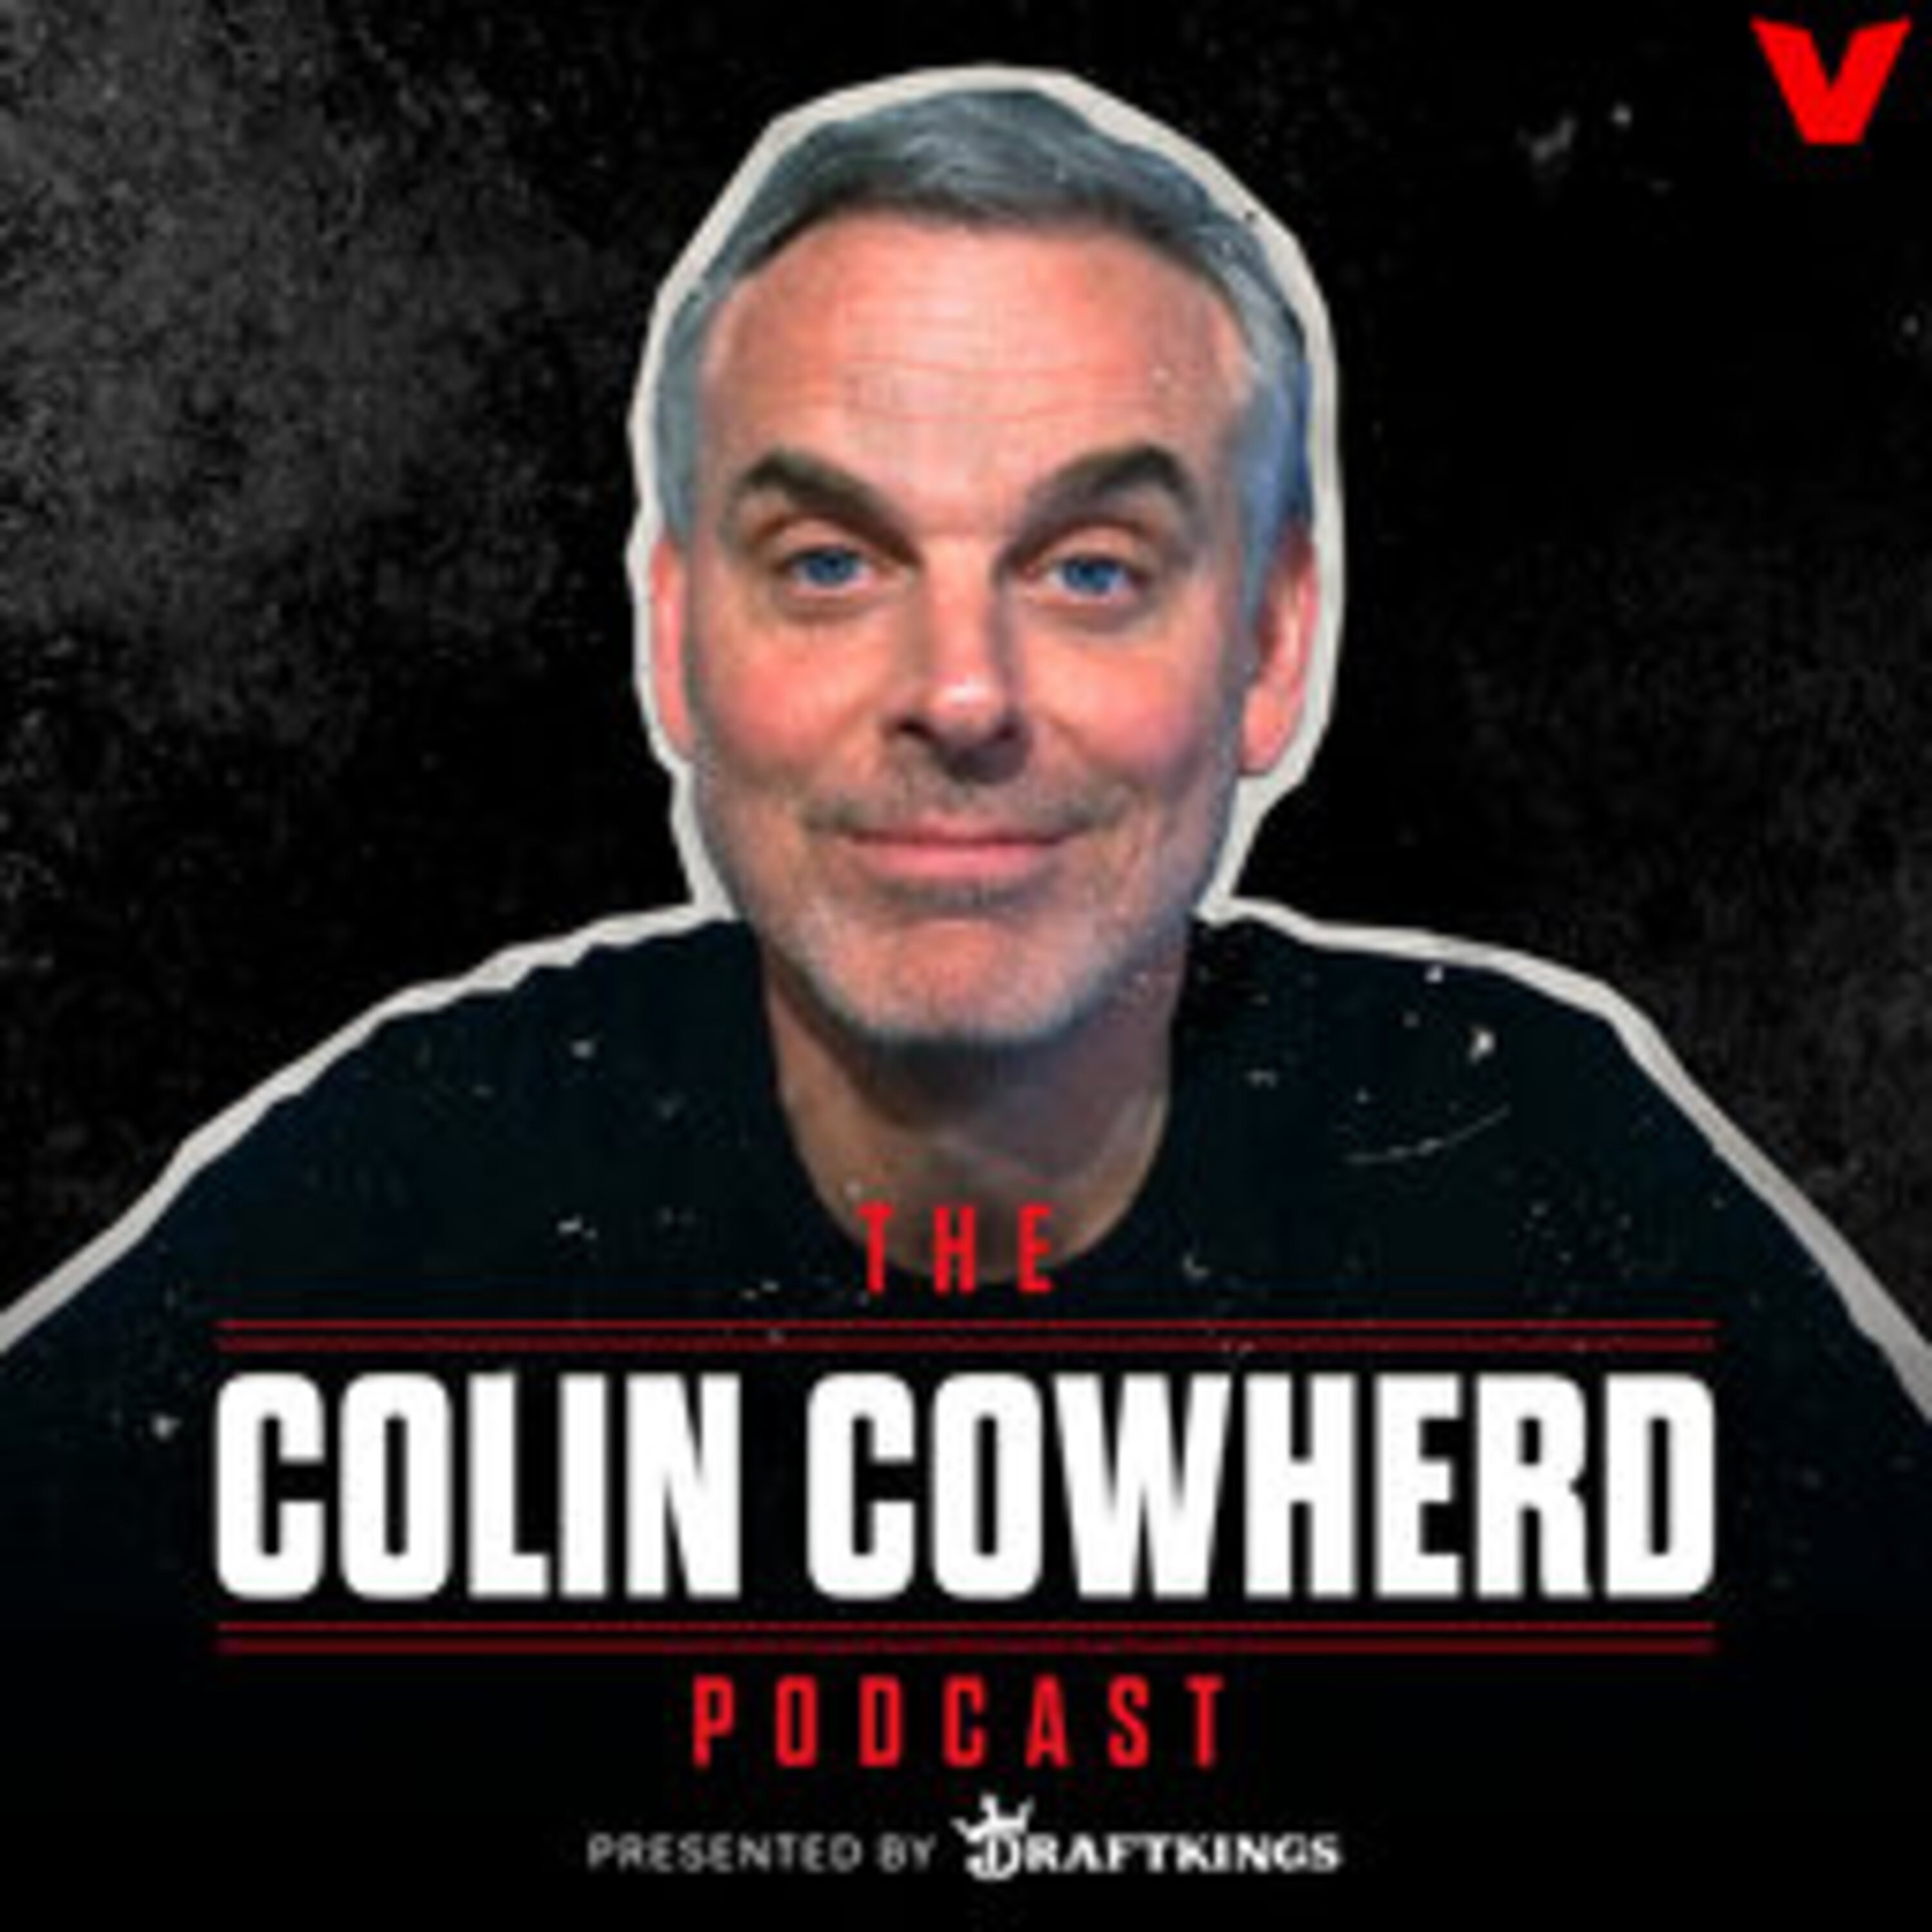 Colin Cowherd Podcast - Nick Wright Part 1: Ohtani’s Story Is Believable, The Next Gambling Scandal, Stop Complaining! Aging + Early Retirement